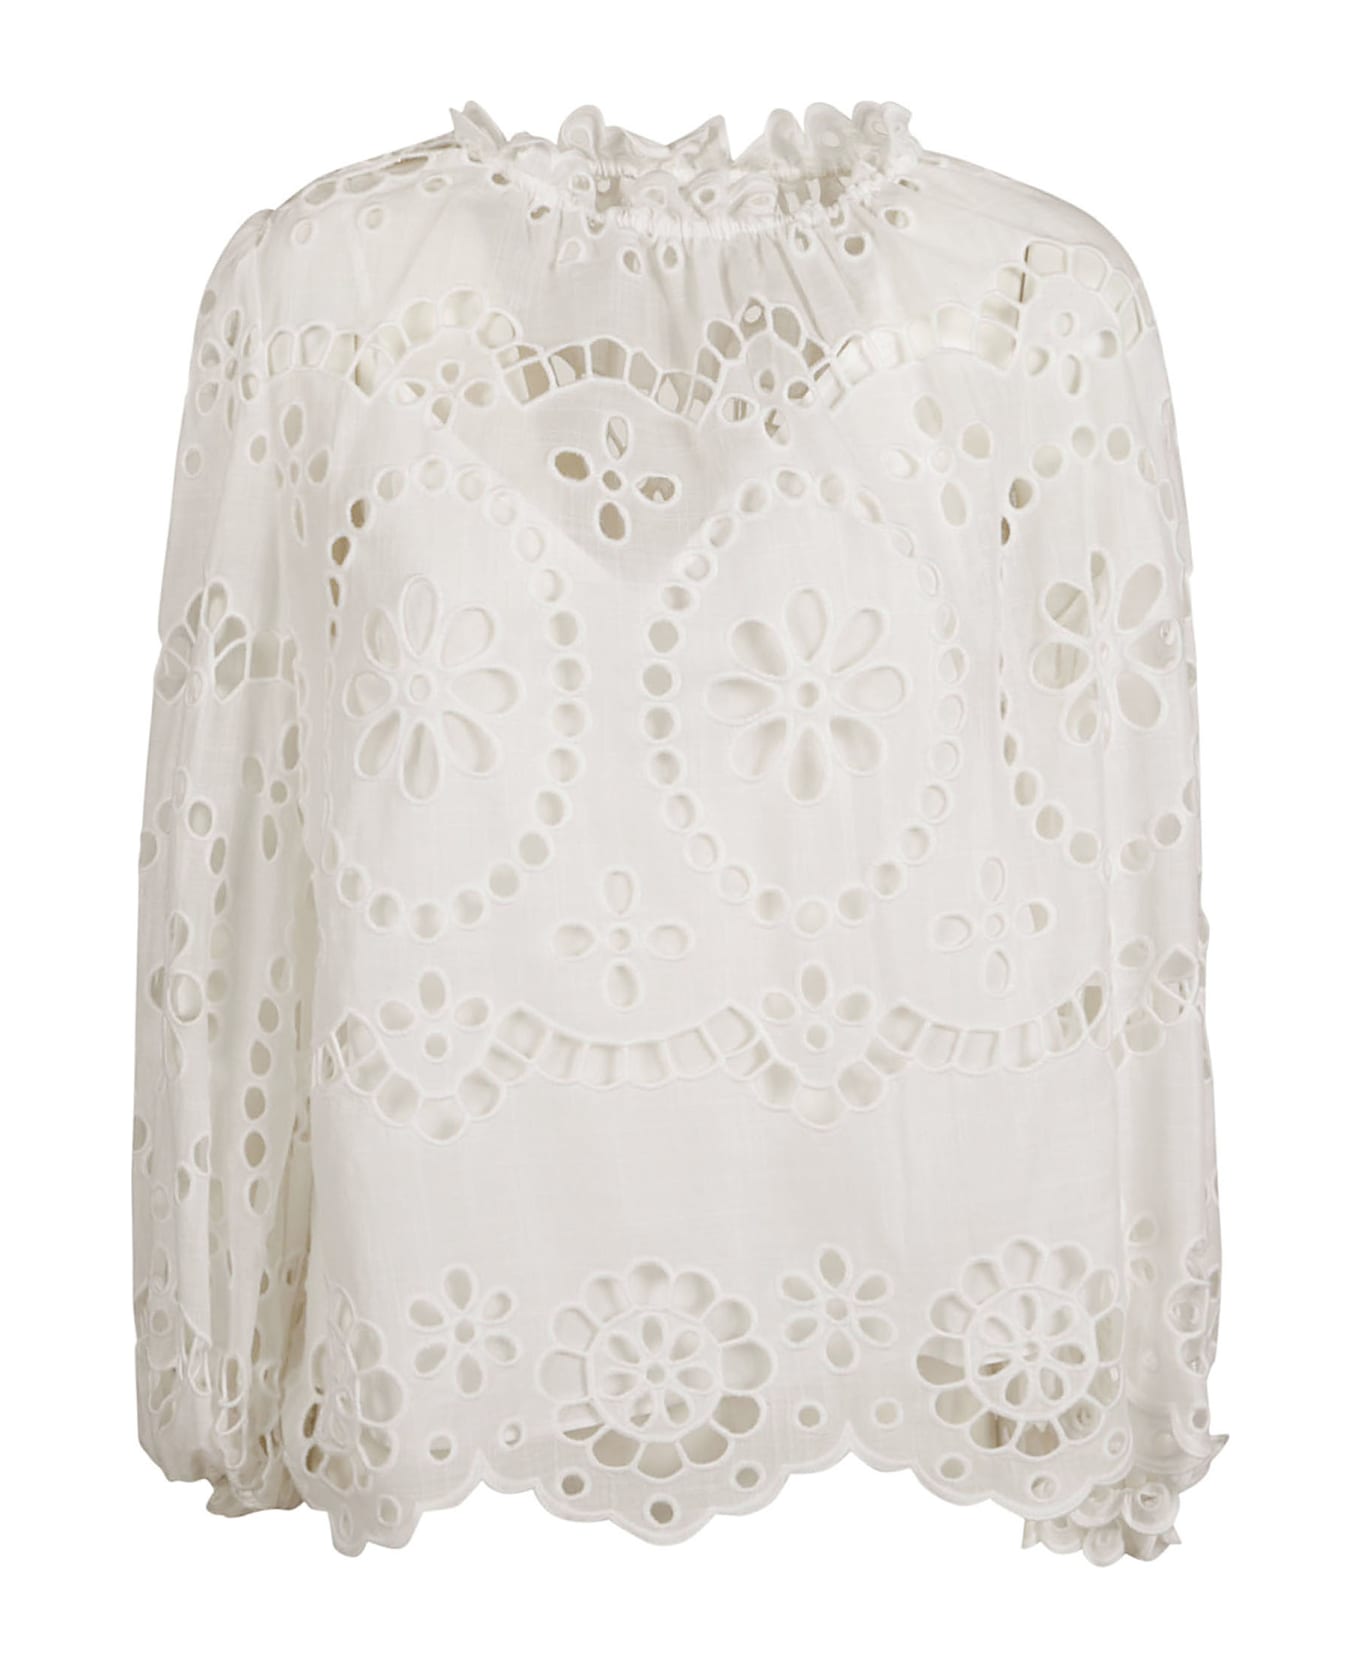 Zimmermann Lexi Embroidered Blouse - Bianco ブラウス